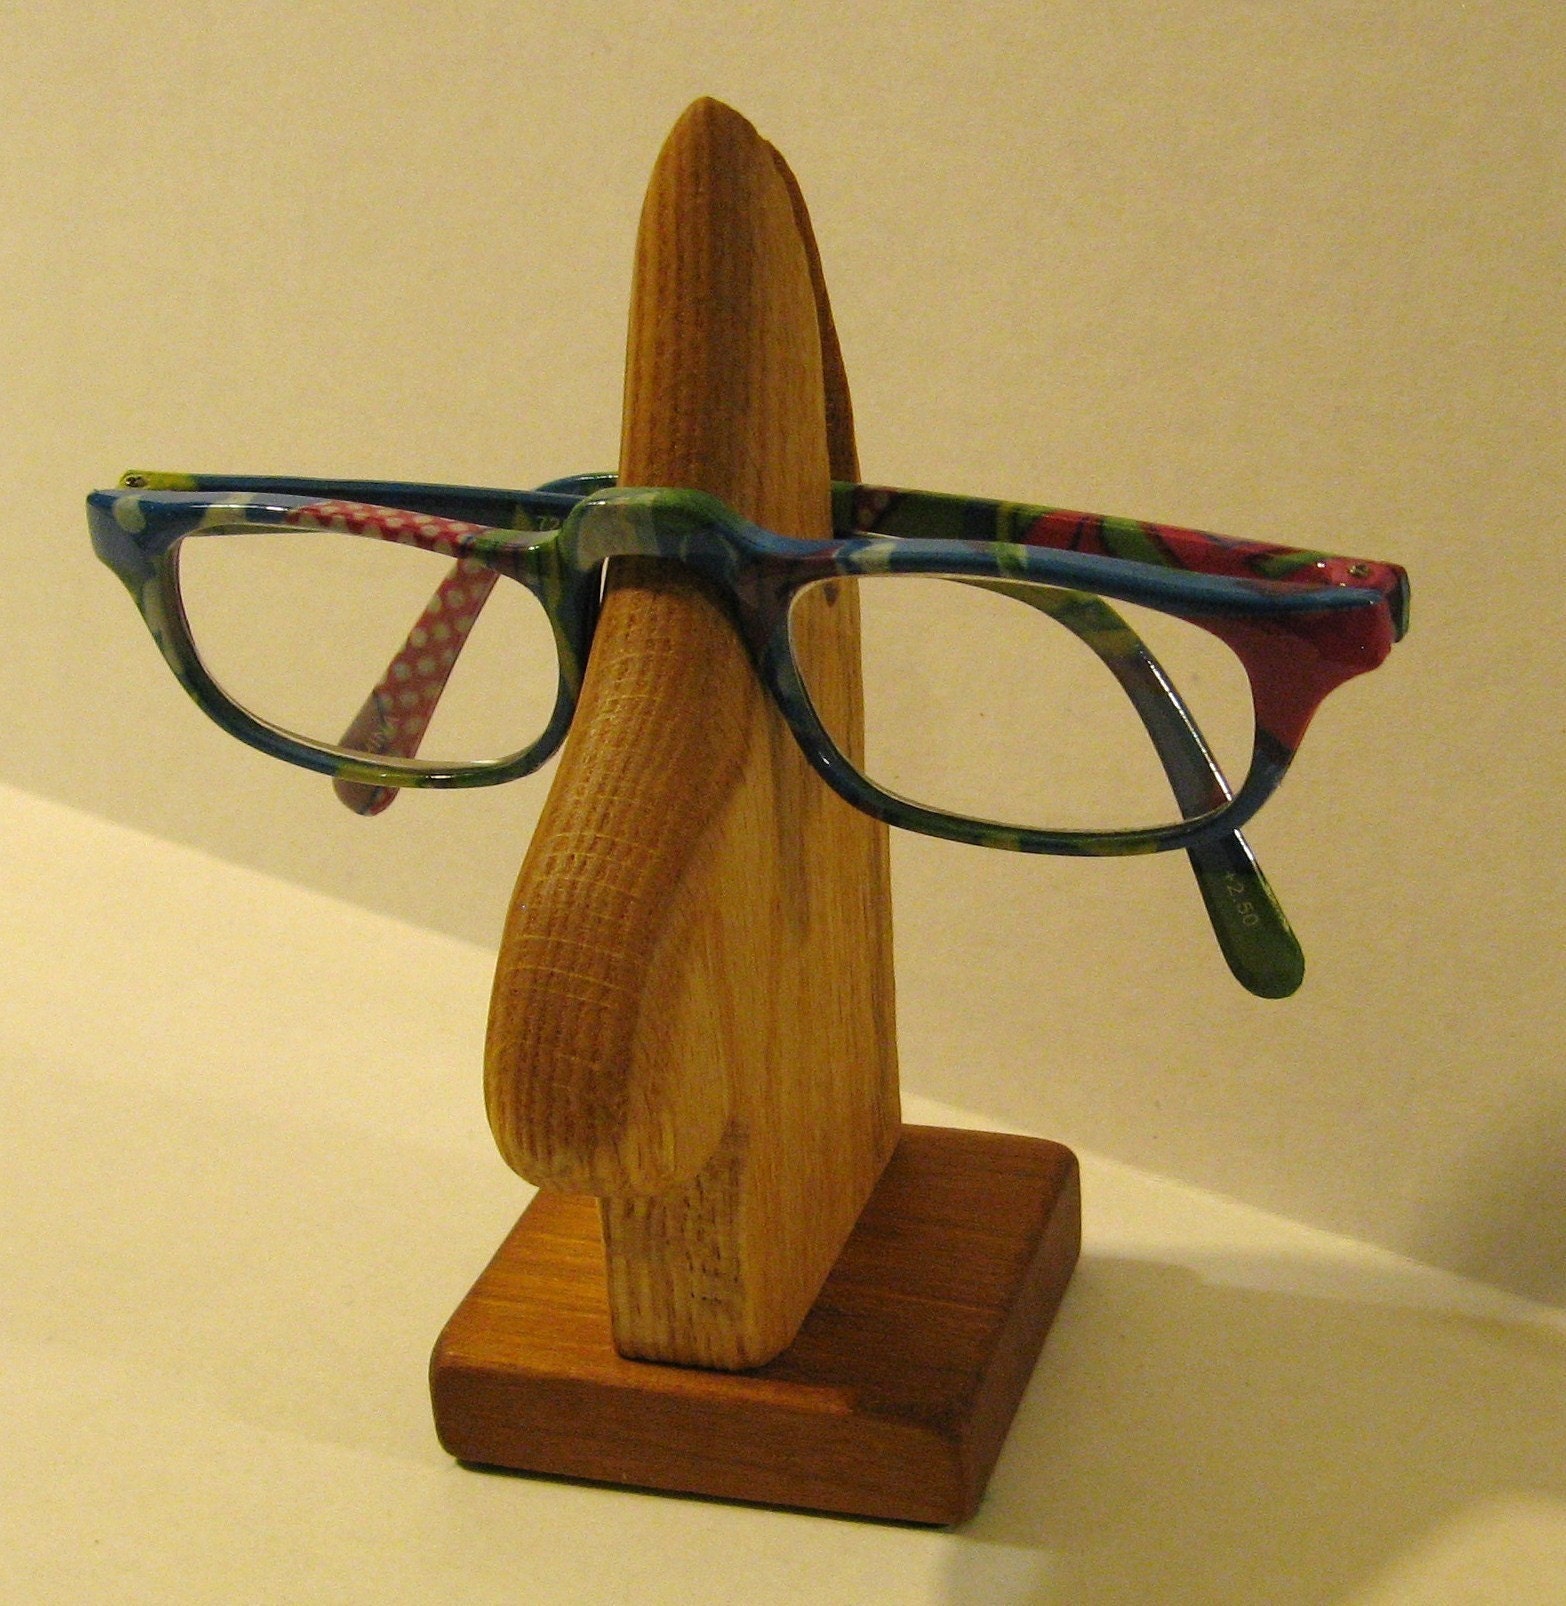 eyeglass-holder-unique-wooden-by-boxnmor-on-etsy